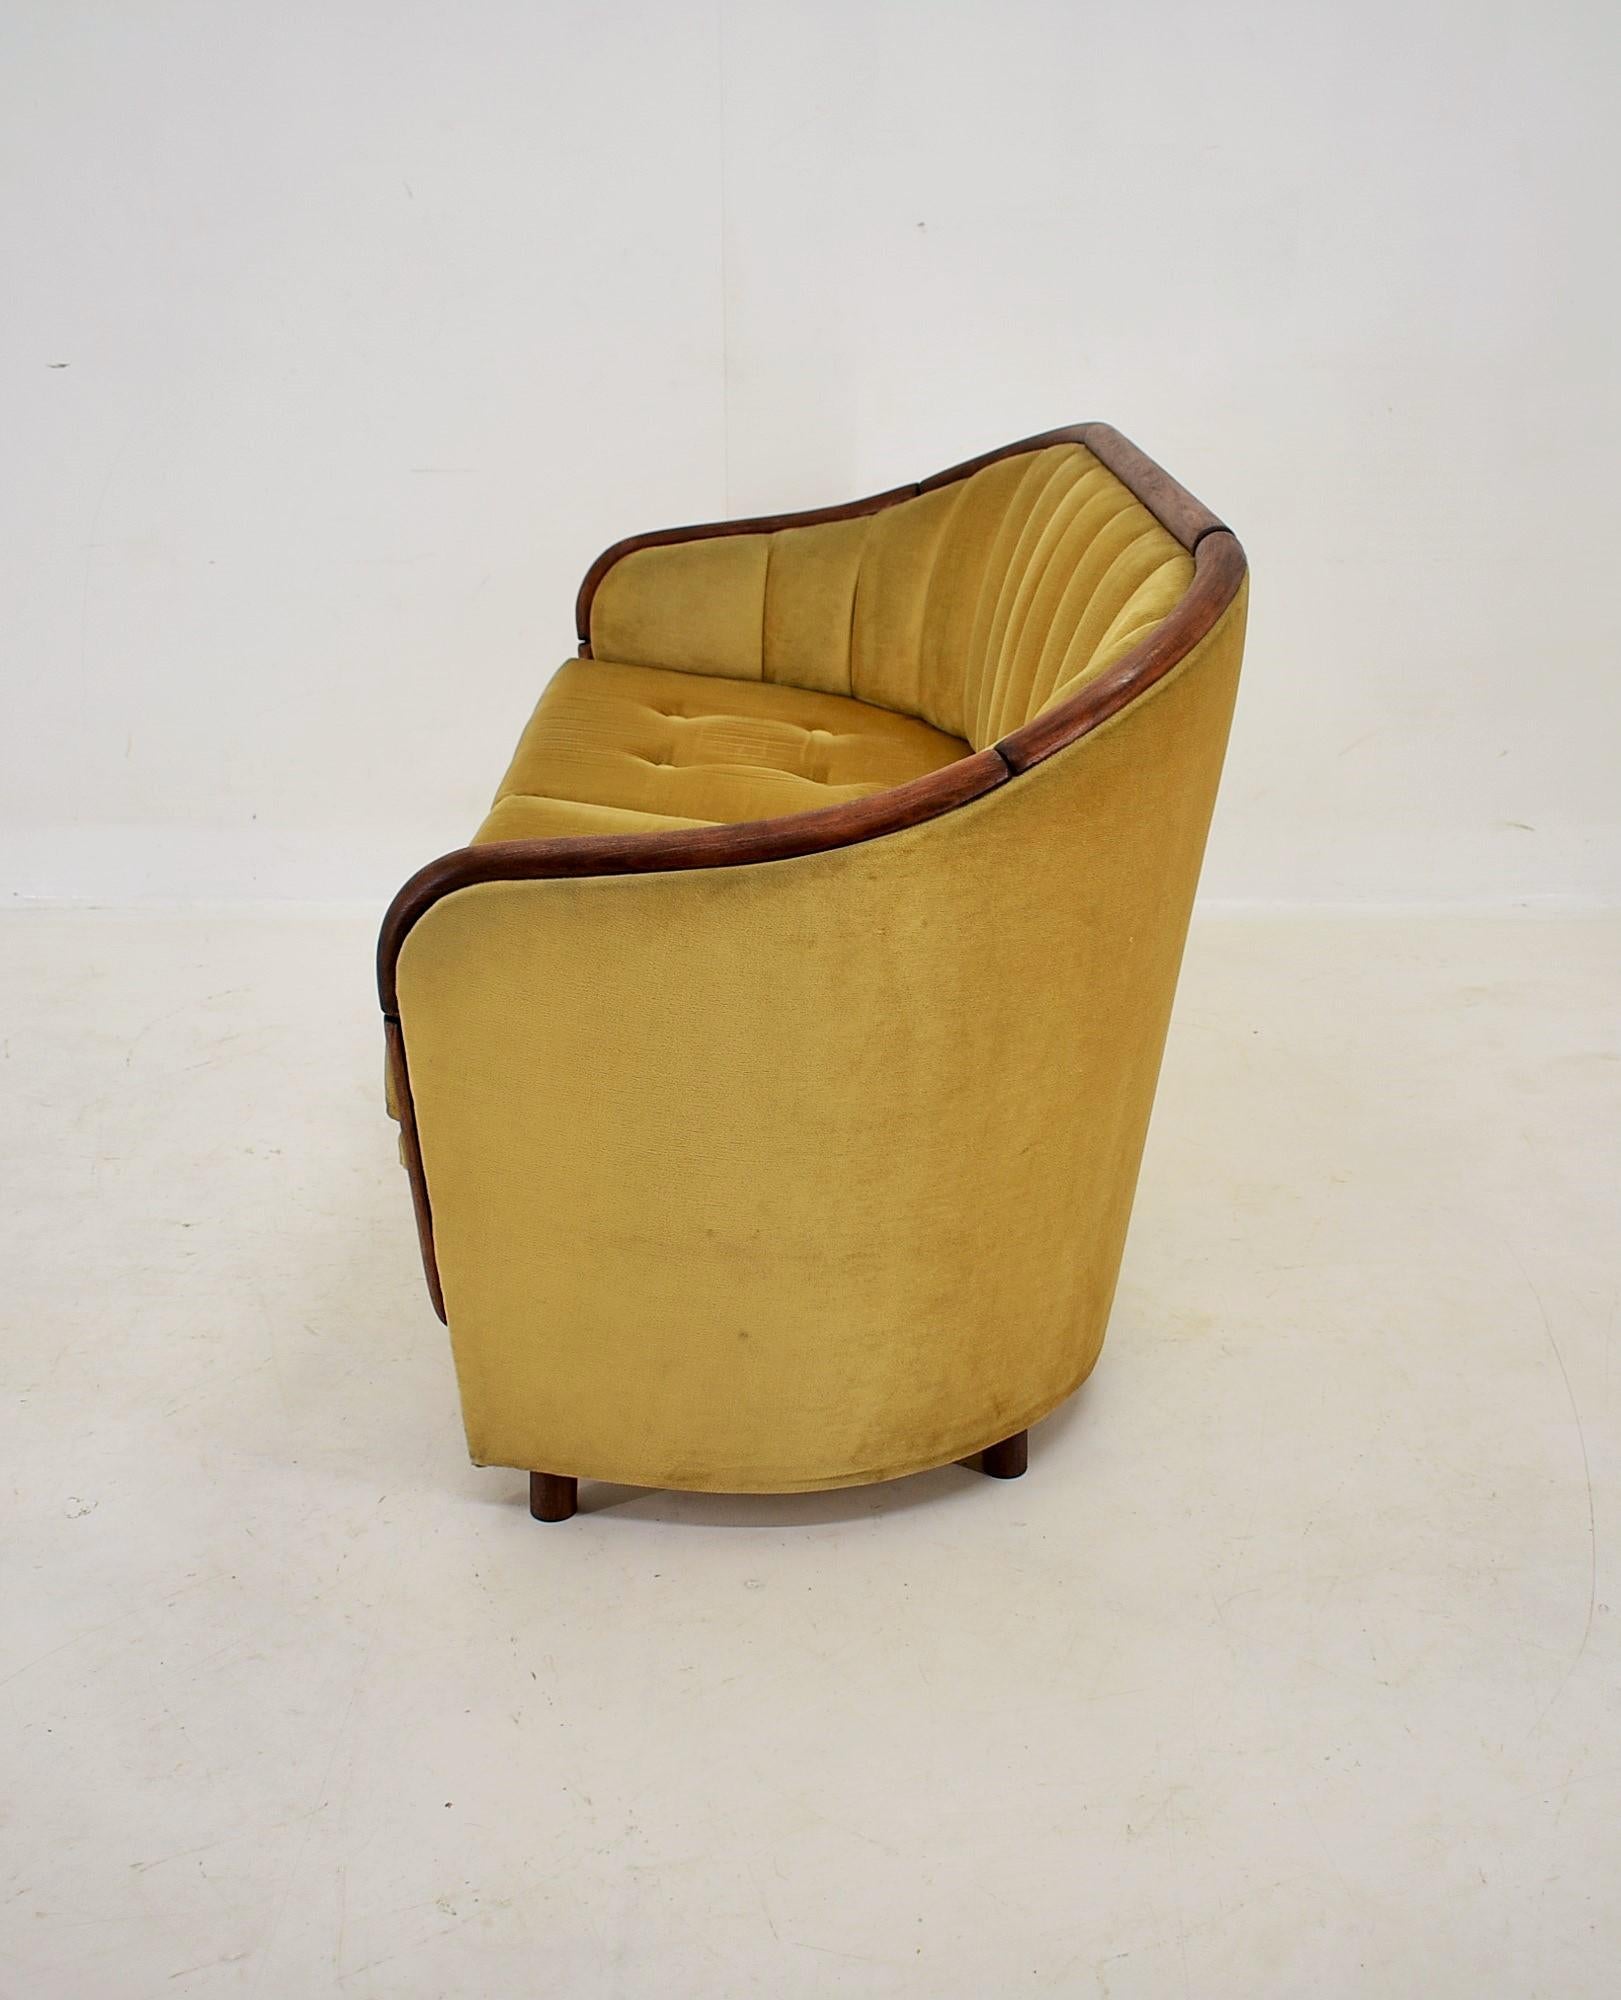 Italian 2-Seat Sofa in the Style of Gio Ponti, 1950s For Sale 4